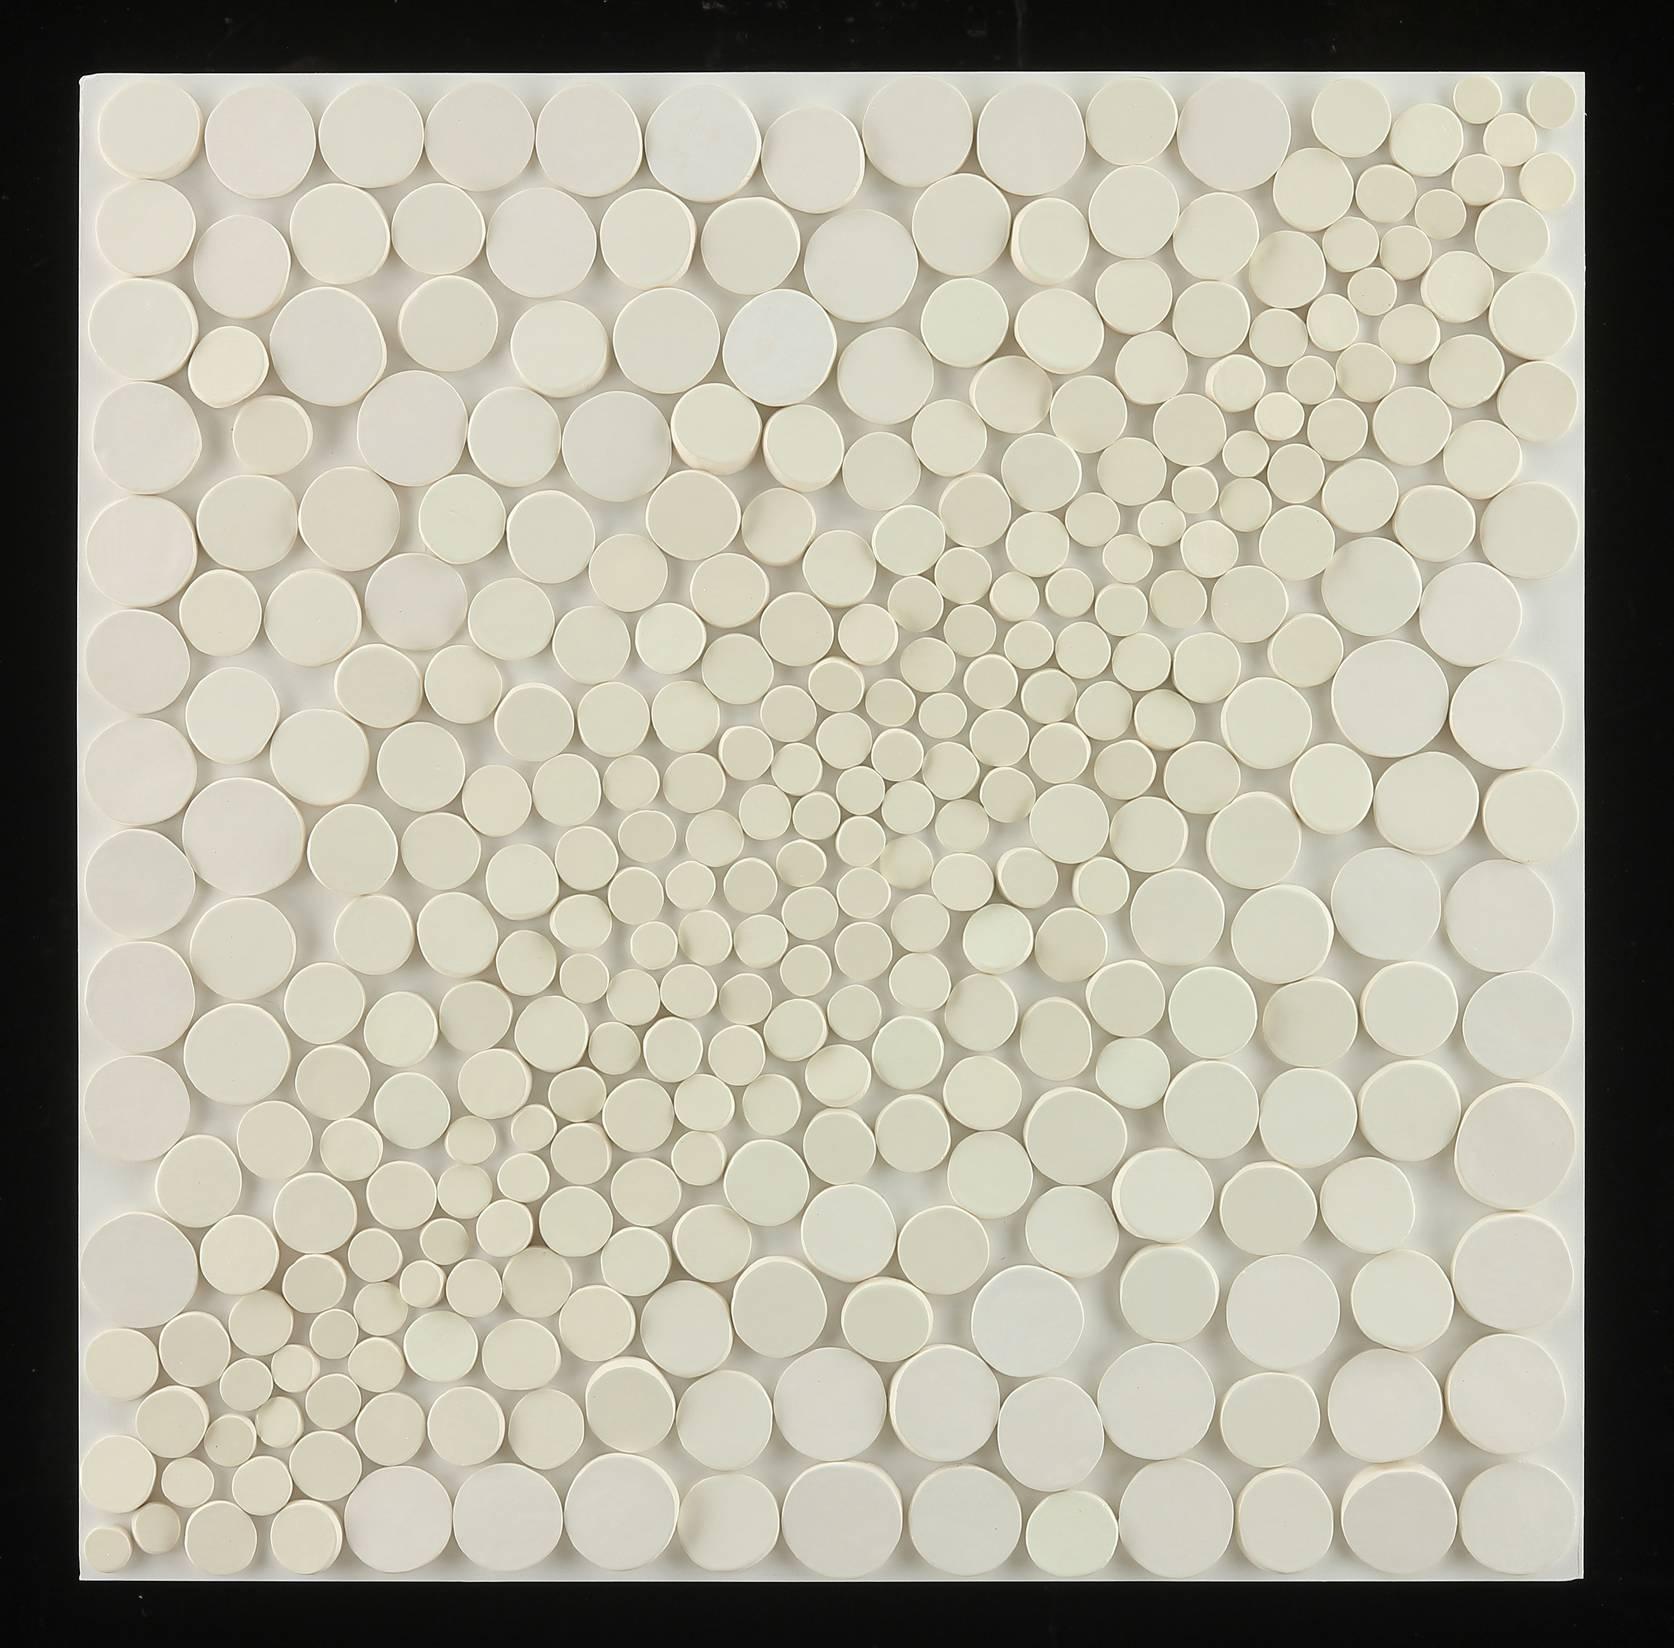 Jane B. Grimm Abstract Sculpture - Be Bop I  / white wall sculpture